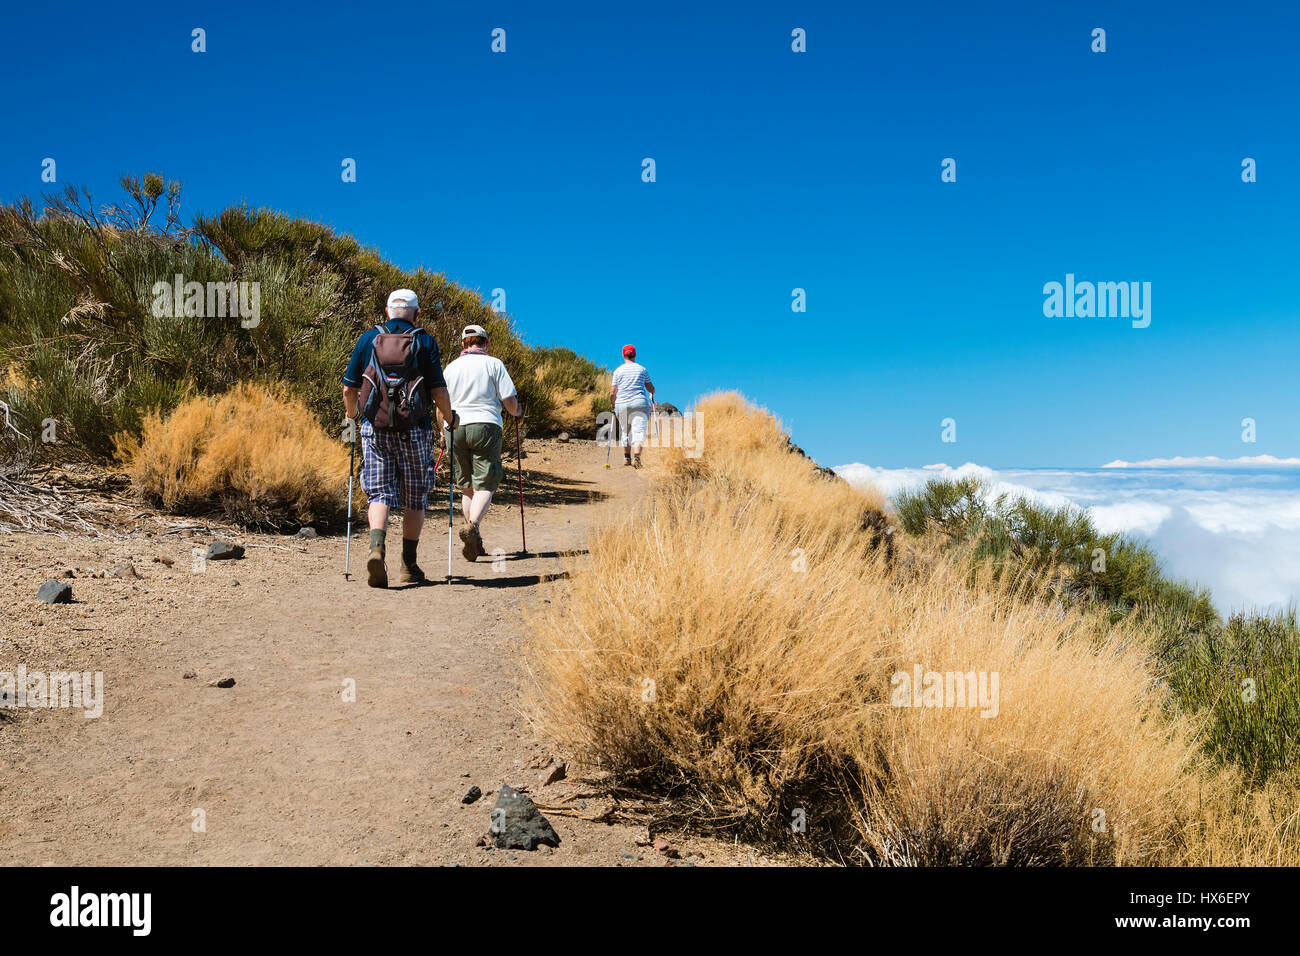 TENERIFE - OCTOBER 6: Senior tourists hiking on the Montana de las Arenas Negras above the clouds in Tenerife, Spain on October 6, 2014 Stock Photo